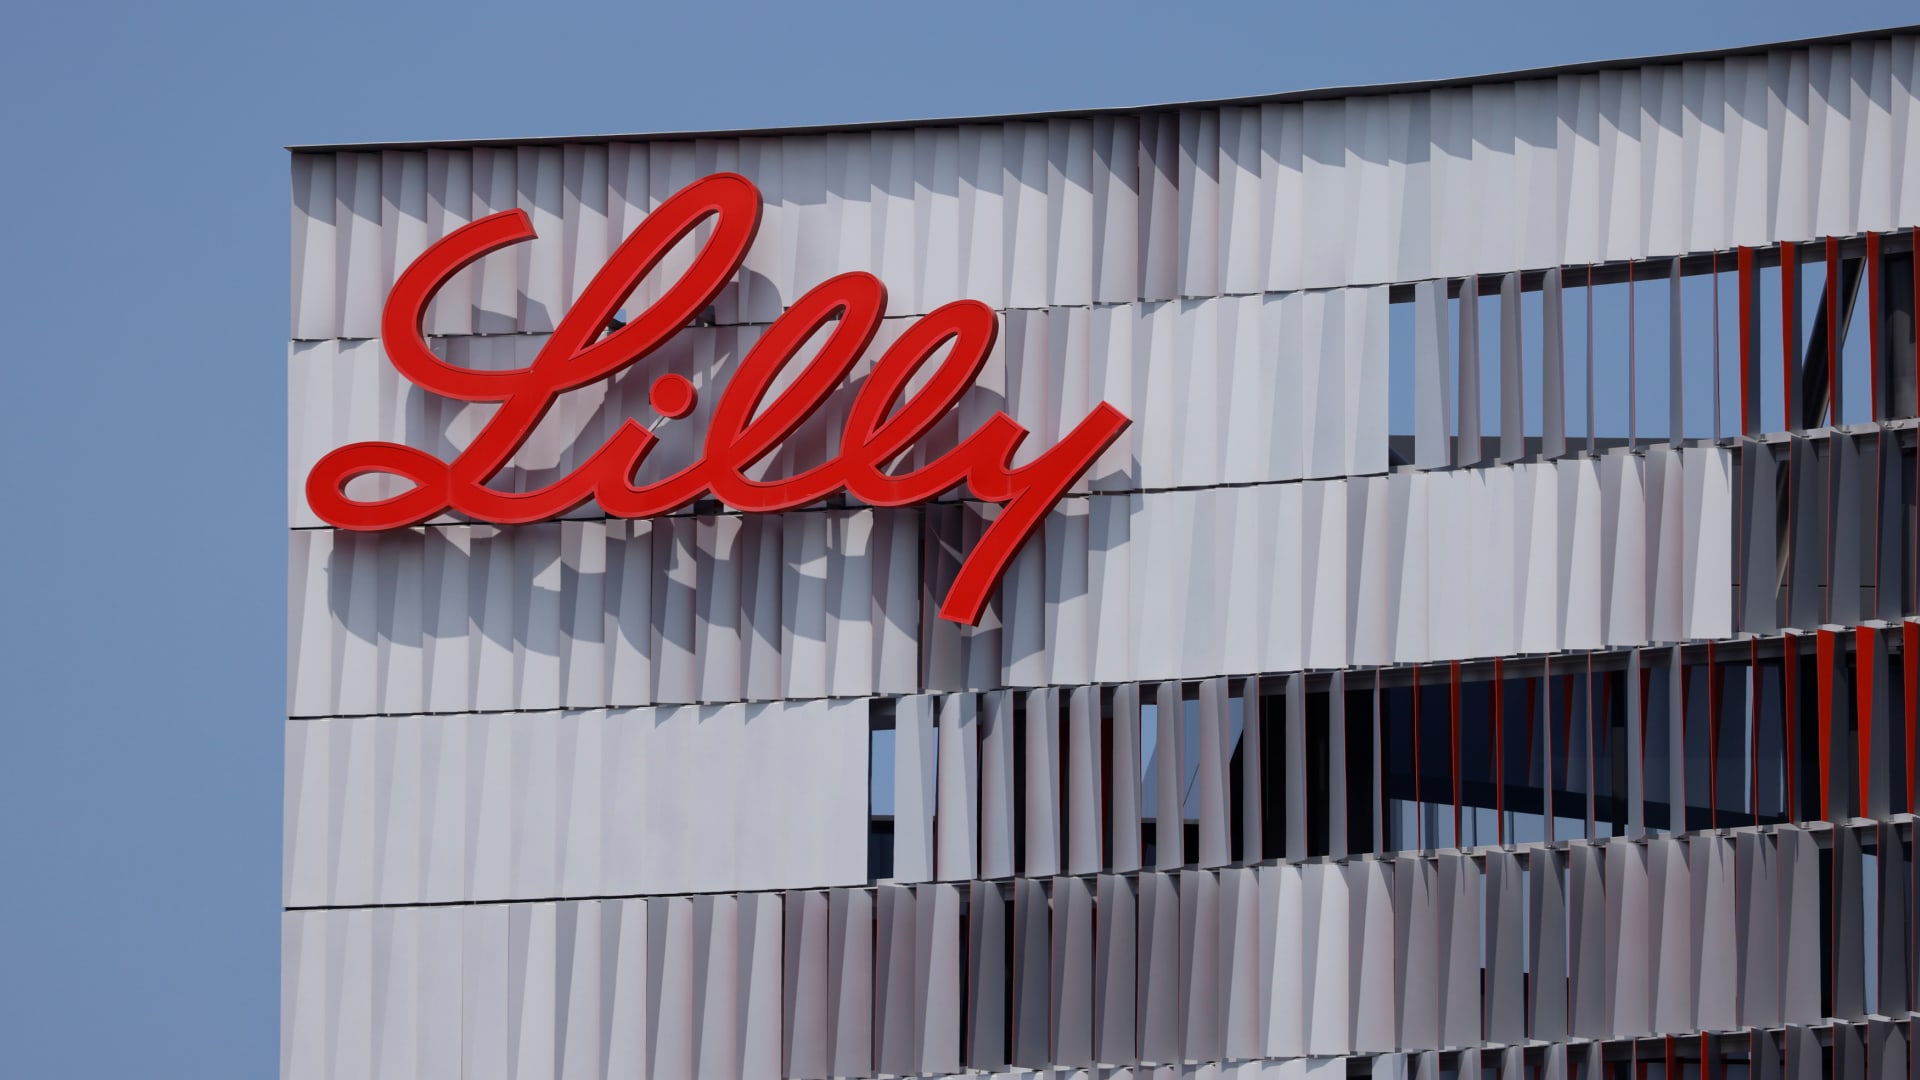 The Eli Lilly logo is shown on one of the company's offices in San Diego, California, on Sept. 17, 2020.